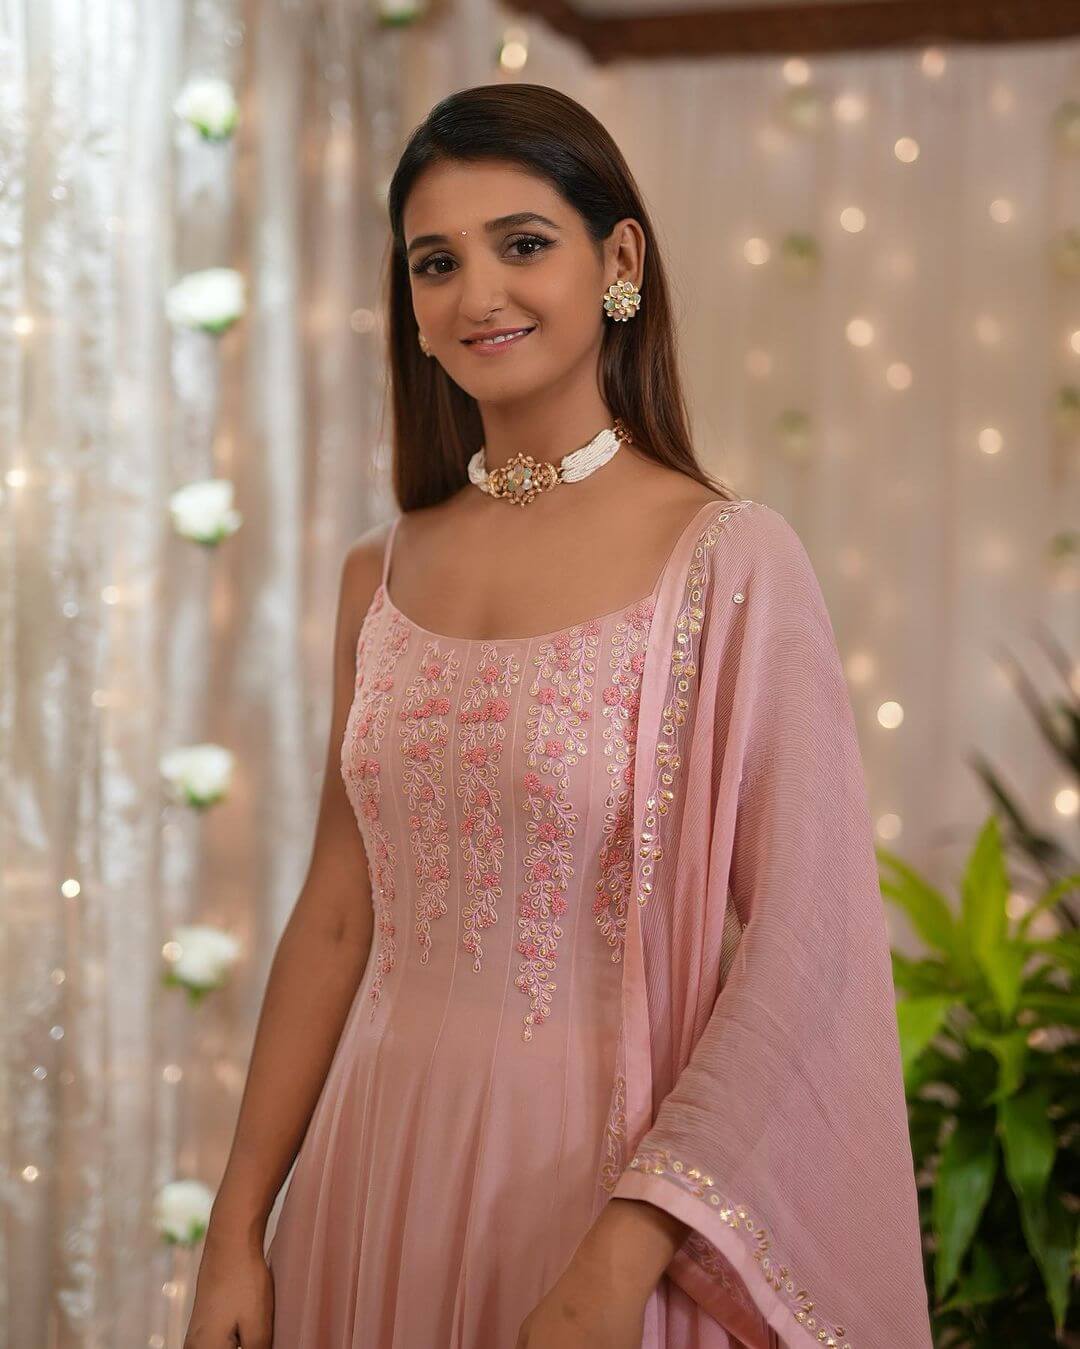 Gorgeous Shakti Mohan In Pink A-Line Suit With Pearl Choker